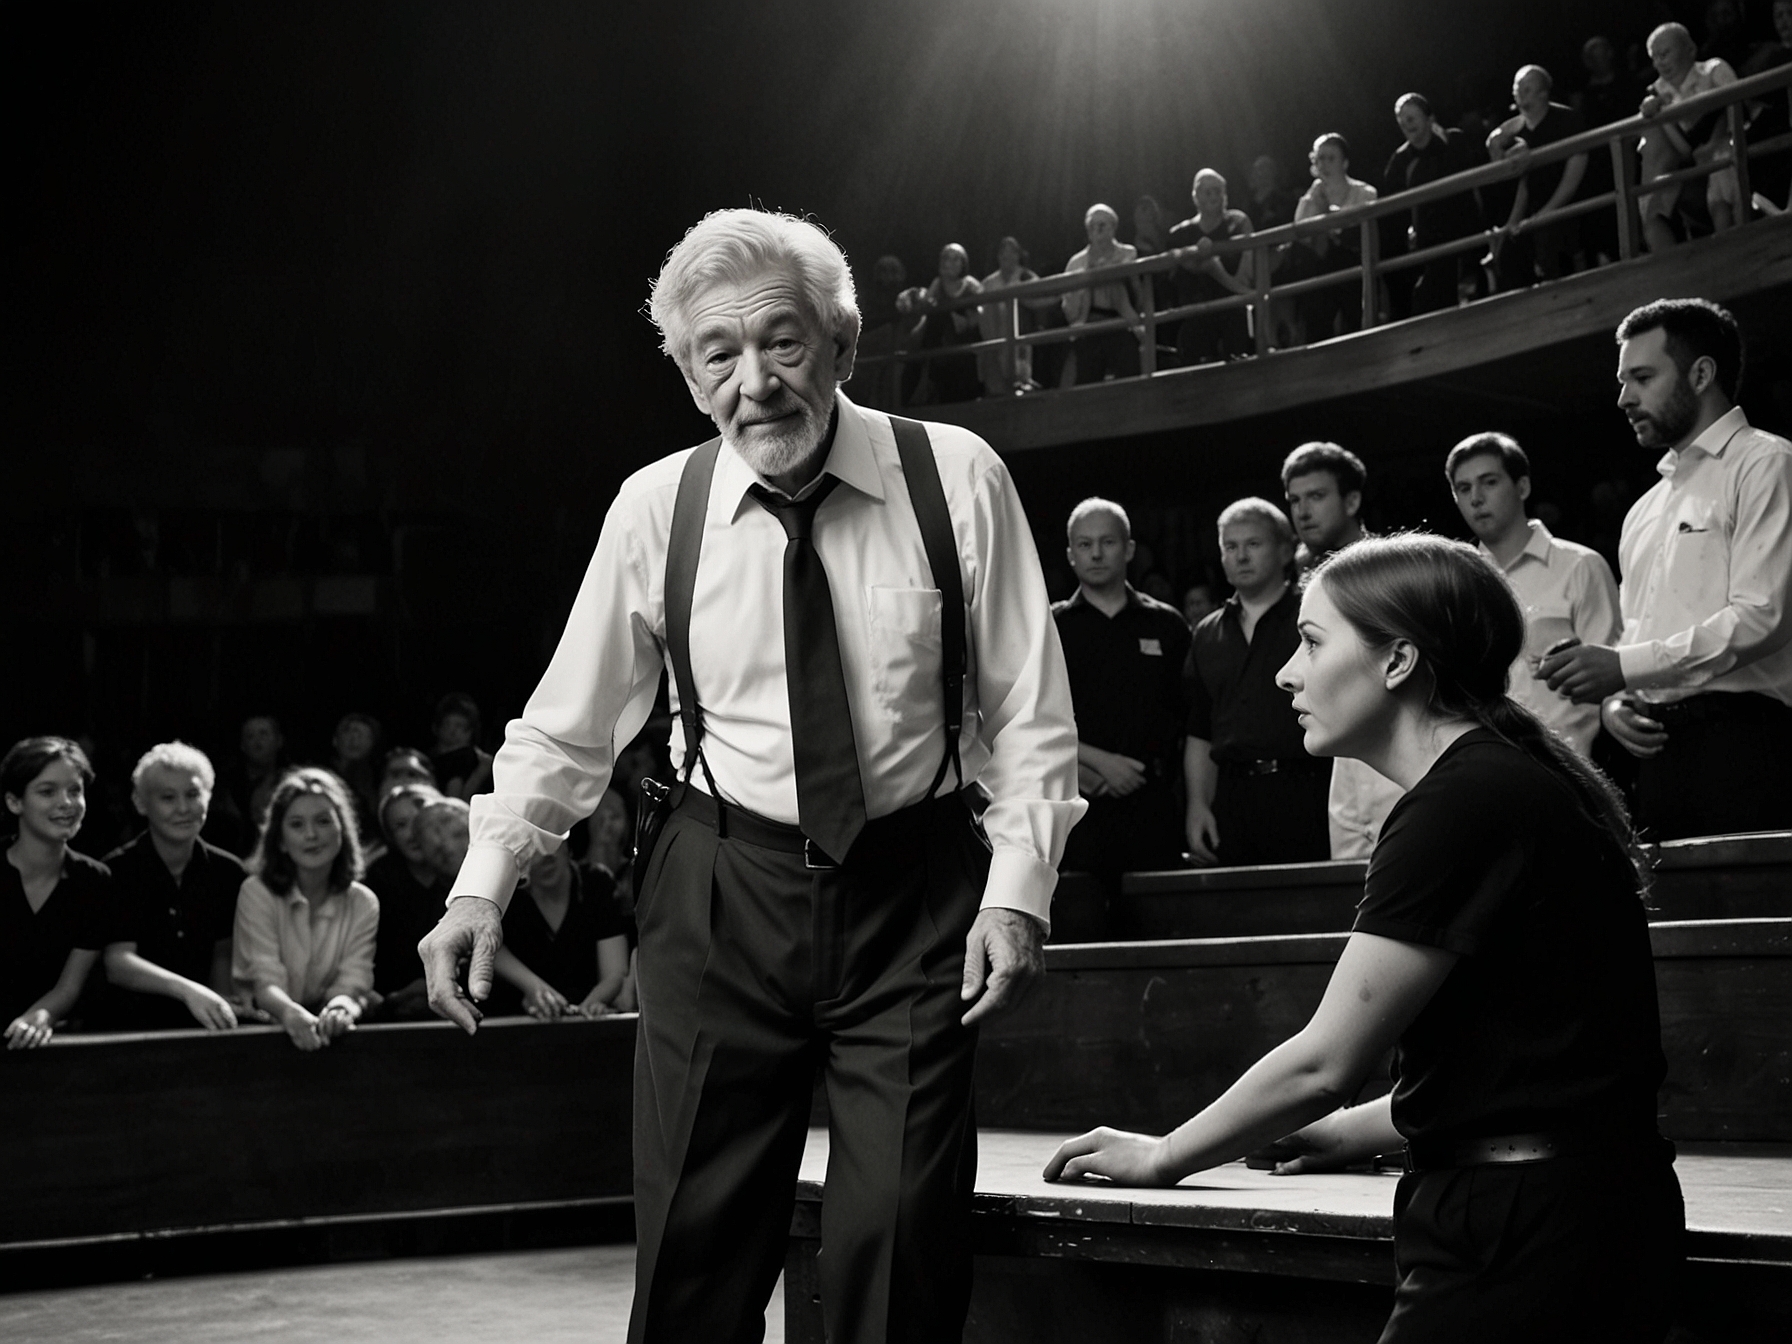 Emergency services assisting Sir Ian McKellen after his fall off the stage into the orchestra pit, with the audience and theatre staff looking on in concern.